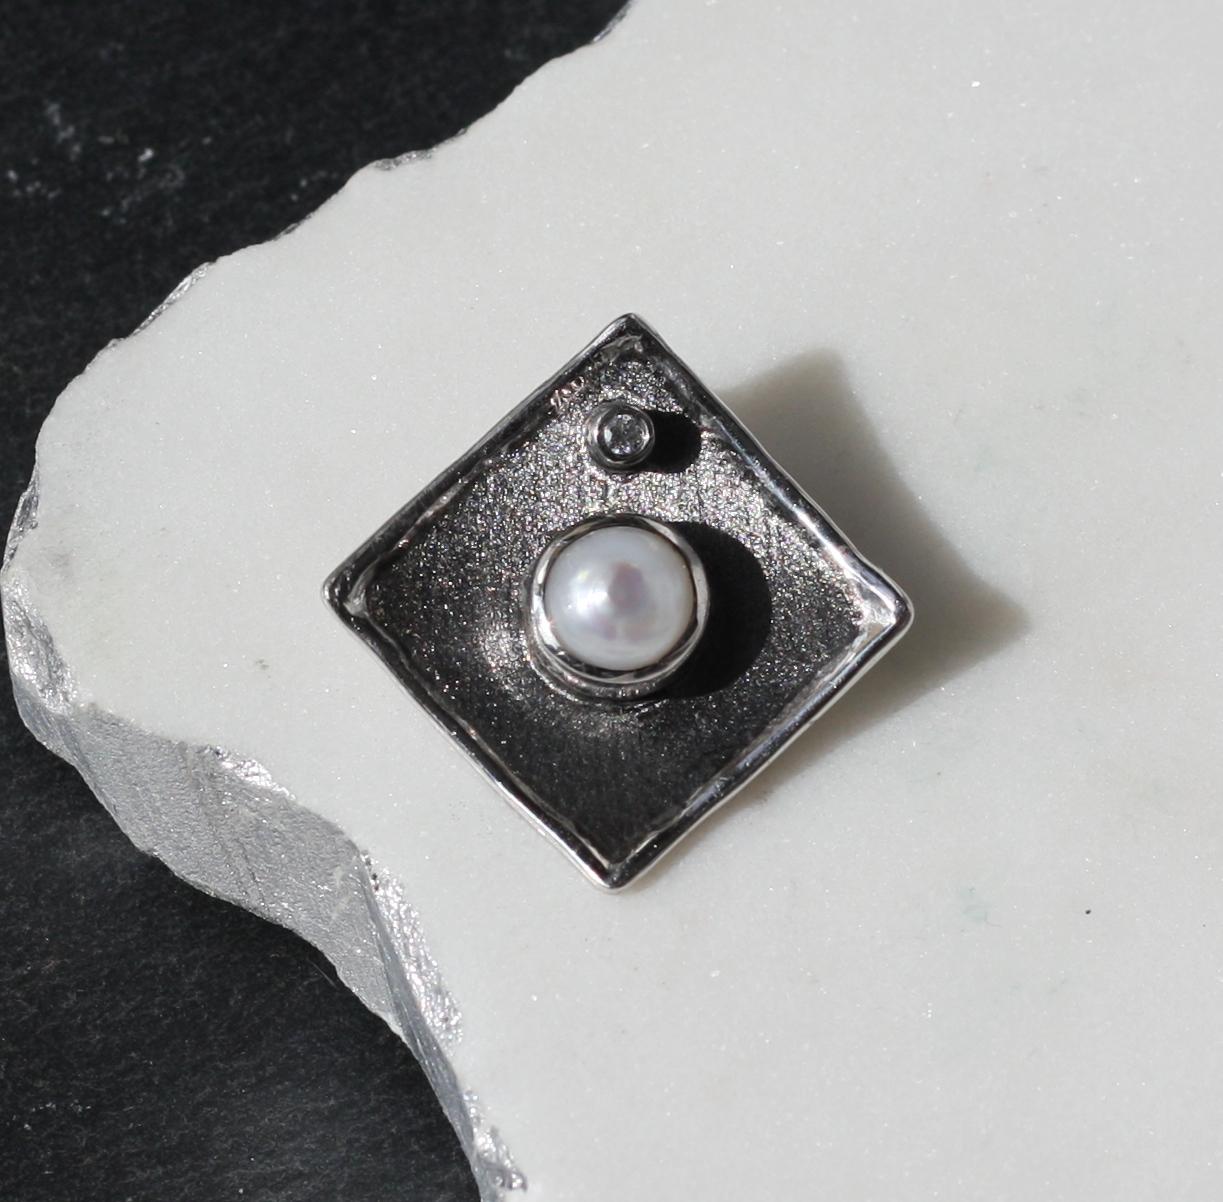 This is a geometrically shaped pendant enhancer from Yianni Creations all done by hand from fine silver 950 purity and plated with palladium to resist tarnish. This slide from Hephestos Collection is finished with black rhodium. Against the black